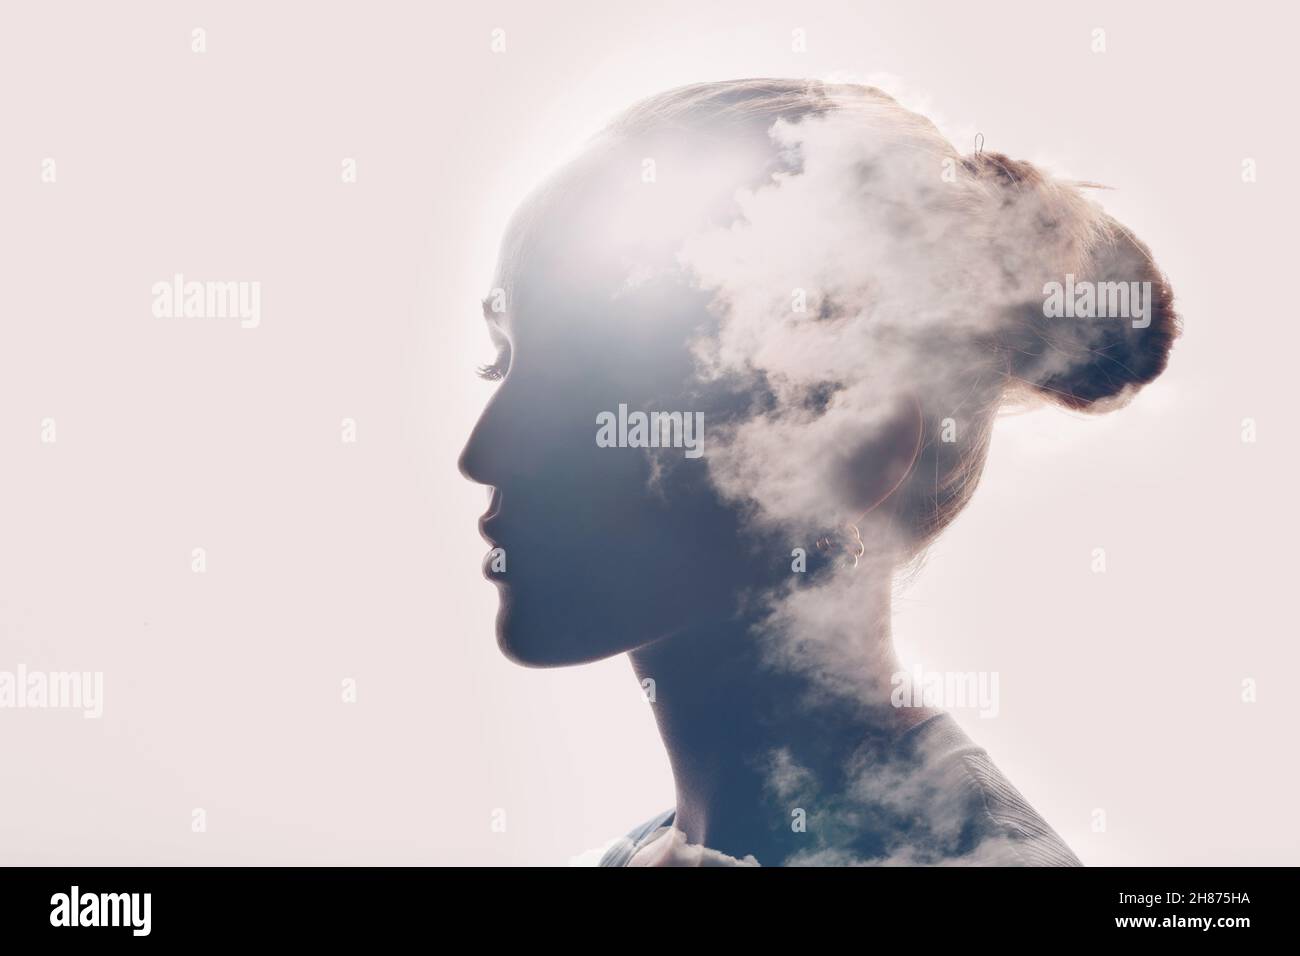 Psychology and caucasian woman mental health concept. Multiple exposure clouds and sun on female head silhouette. Stock Photo